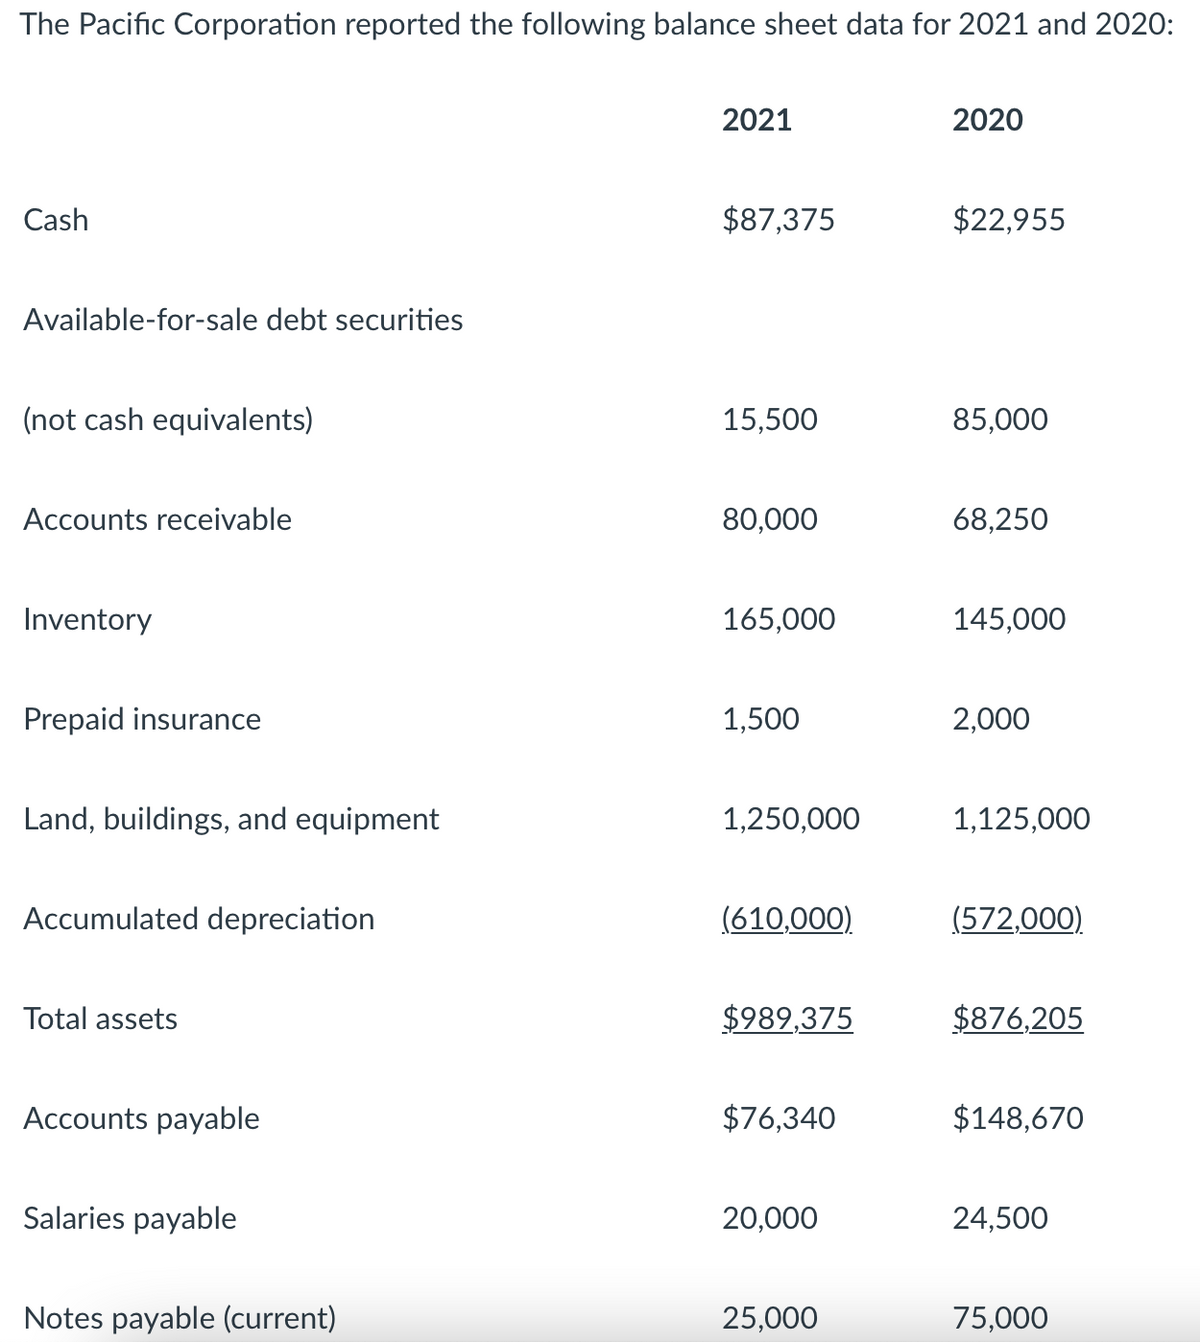 The Pacific Corporation reported the following balance sheet data for 2021 and 2020:
2021
2020
Cash
$87,375
$22,955
Available-for-sale debt securities
(not cash equivalents)
15,500
85,000
Accounts receivable
80,000
68,250
Inventory
165,000
145,000
Prepaid insurance
1,500
2,000
Land, buildings, and equipment
1,250,000
1,125,000
Accumulated depreciation
(610,000)
(572,000)
Total assets
$989,375
$876,205
Accounts payable
$76,340
$148,670
Salaries payable
20,000
24,500
Notes payable (current)
25,000
75,000
